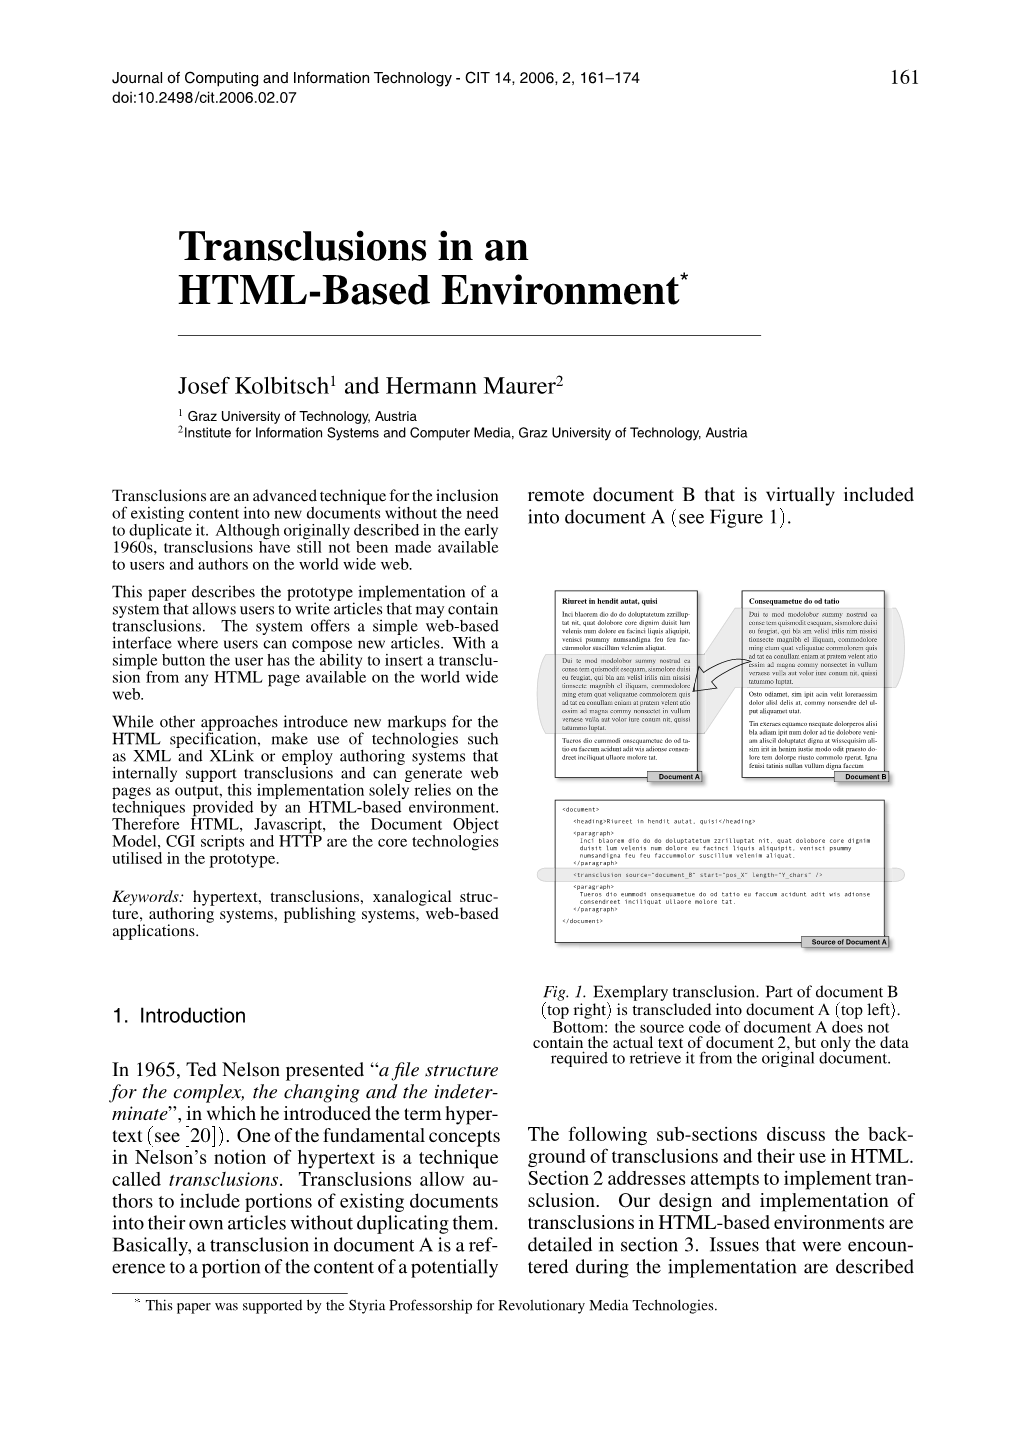 Transclusions in an HTML-Based Environment*